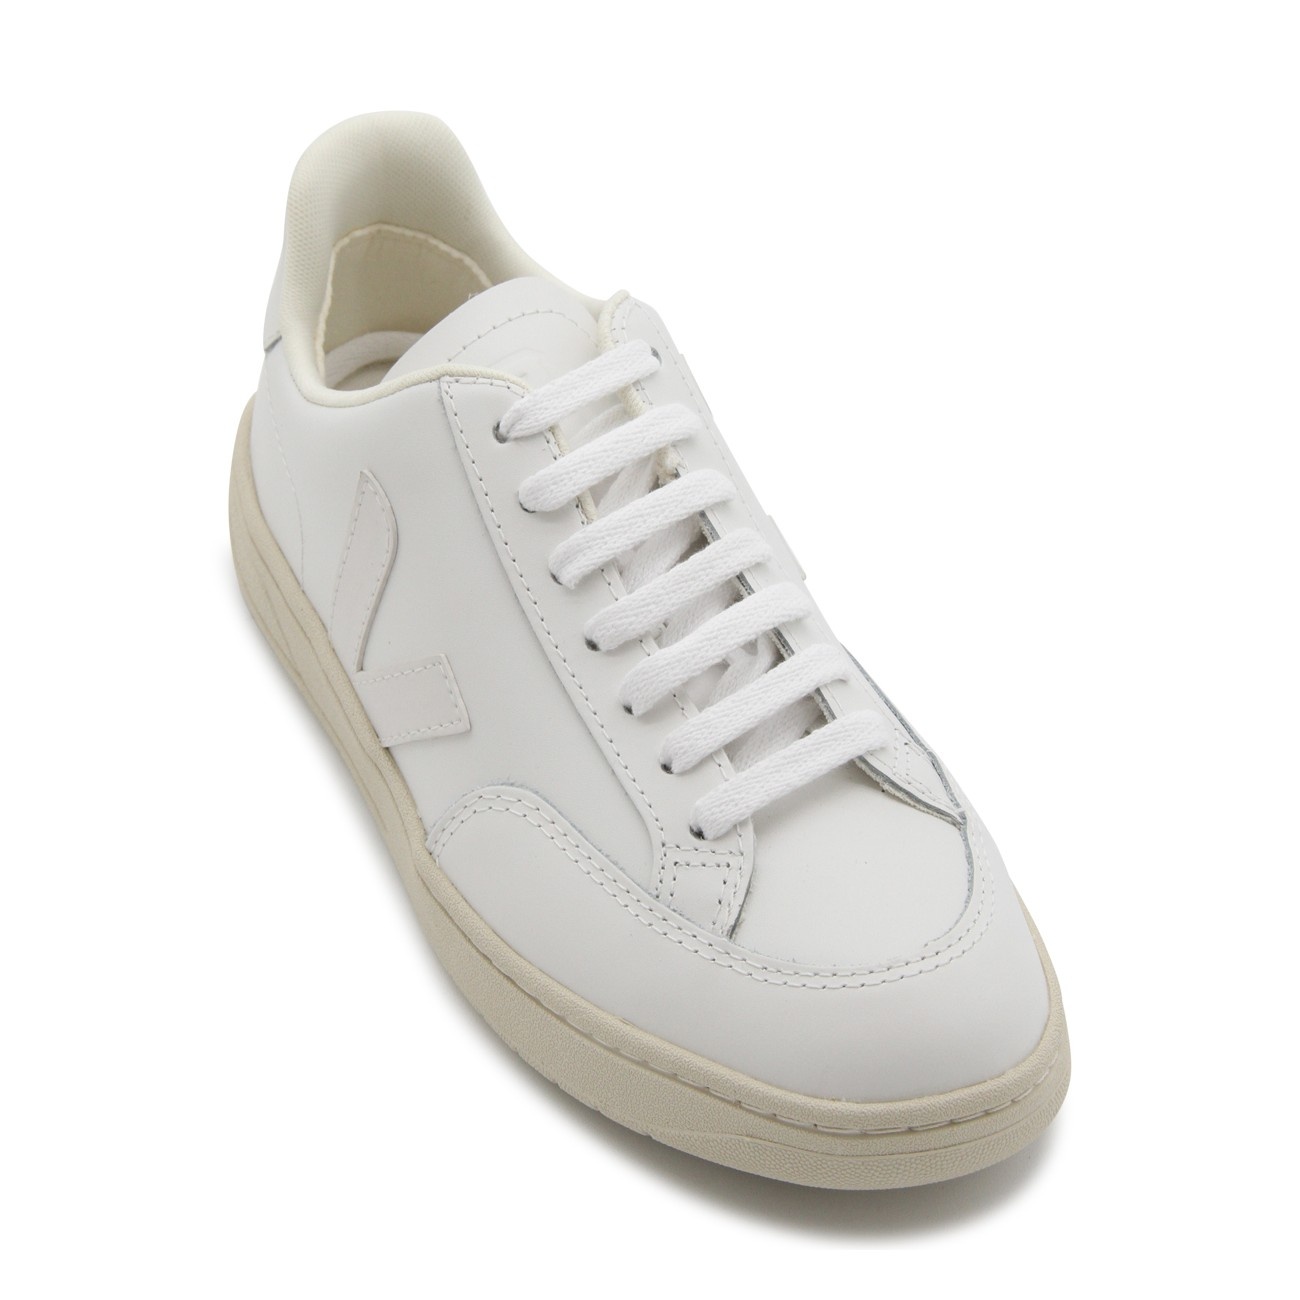 white leather v-123 sneakers - 4